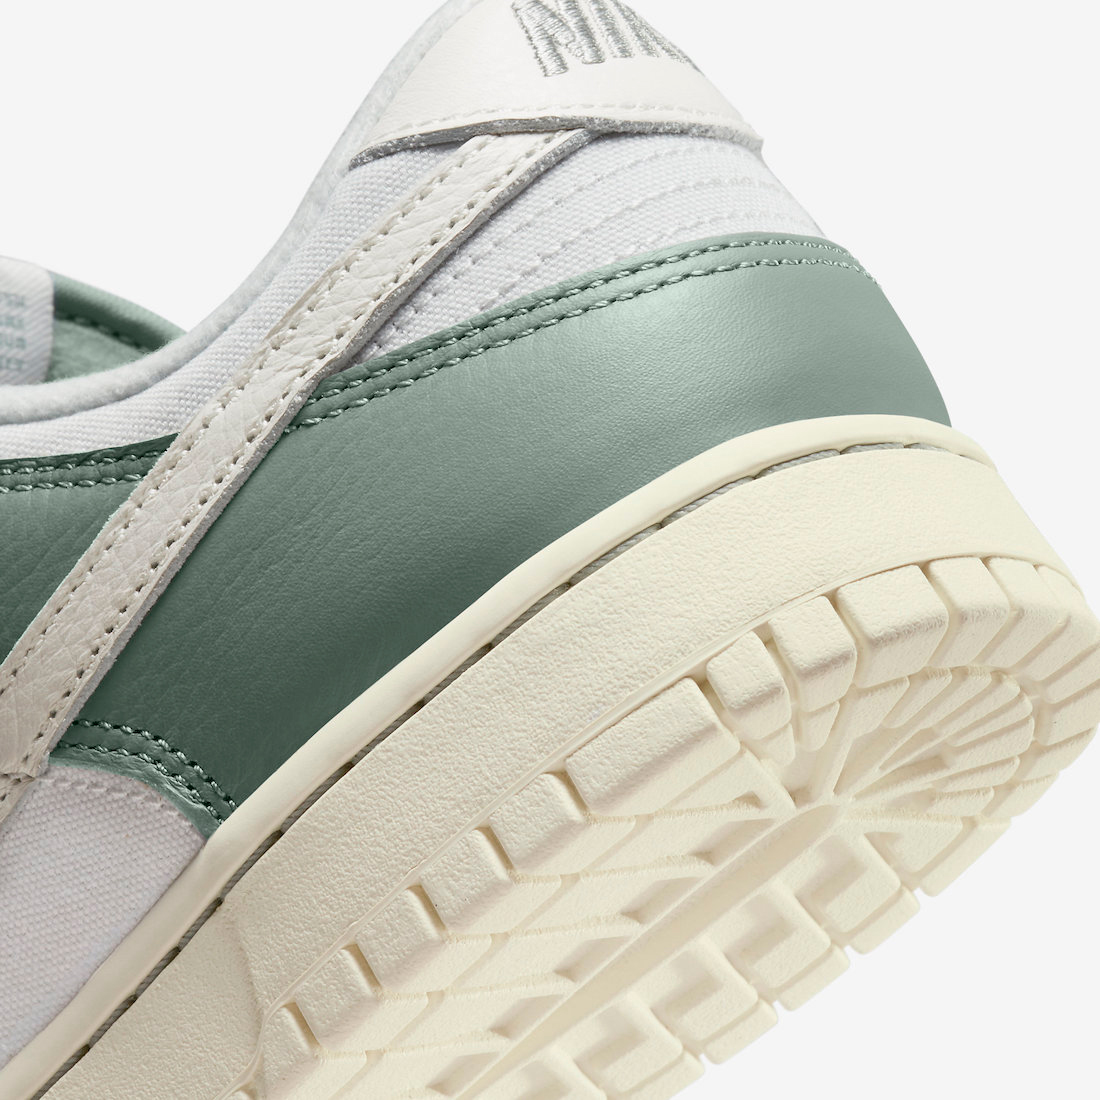 Nike-Dunk-Low-Mica-Green-Release-Date-8